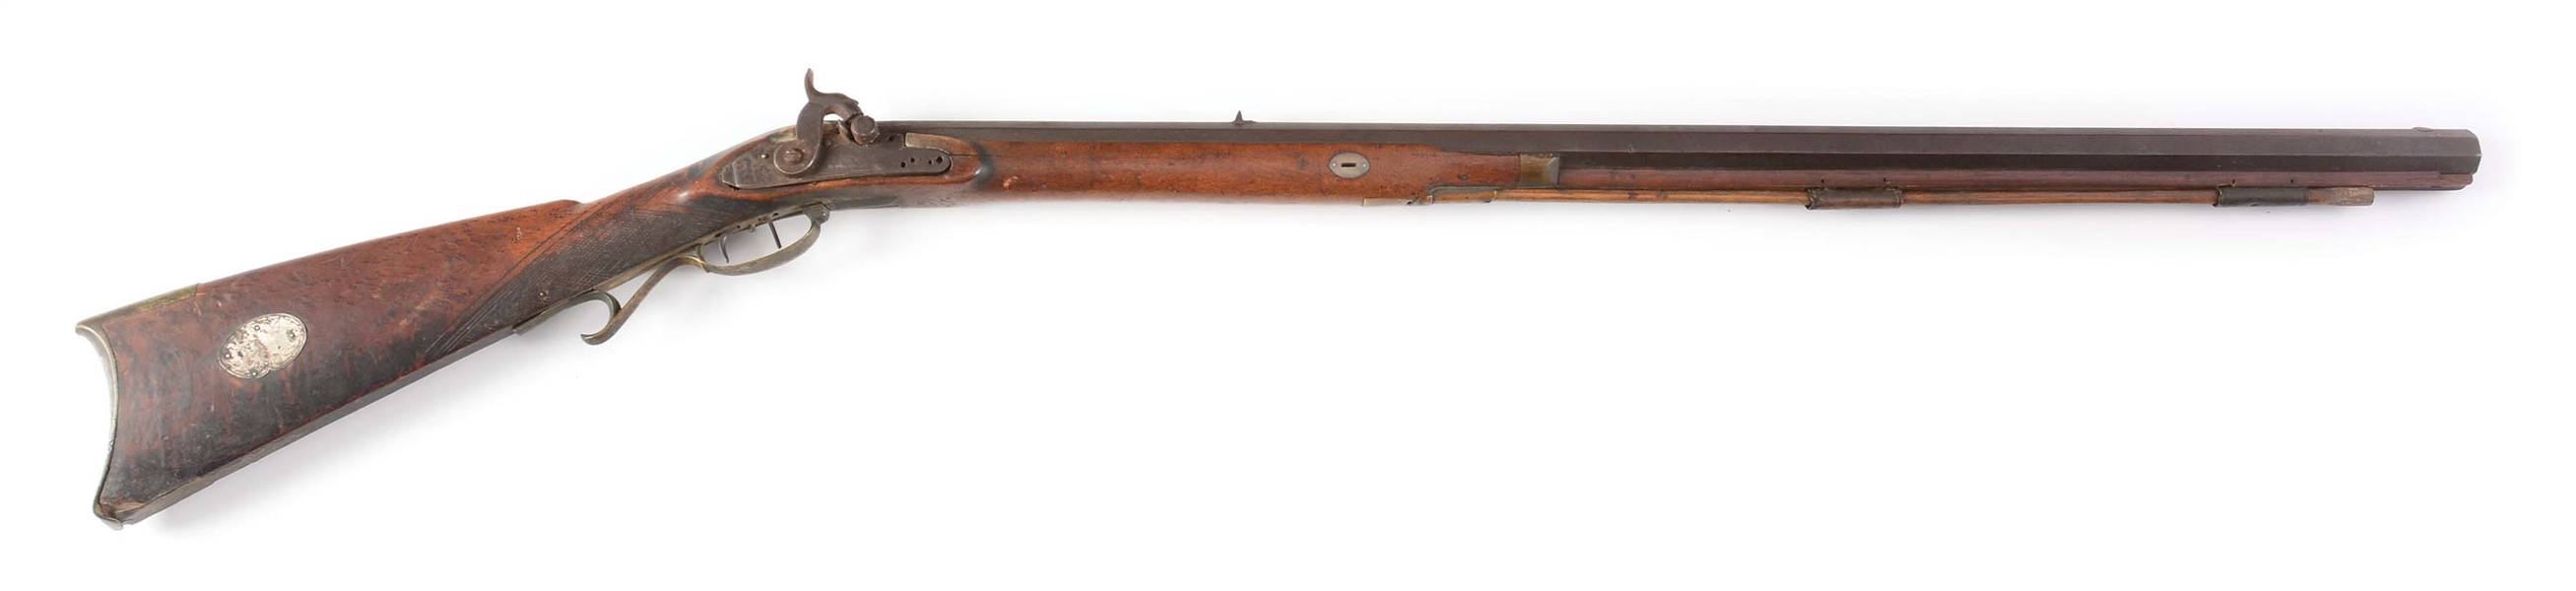 (A) PERCUSSION HALF STOCK RIFLE - MANUFACTURER UNKNOWN.